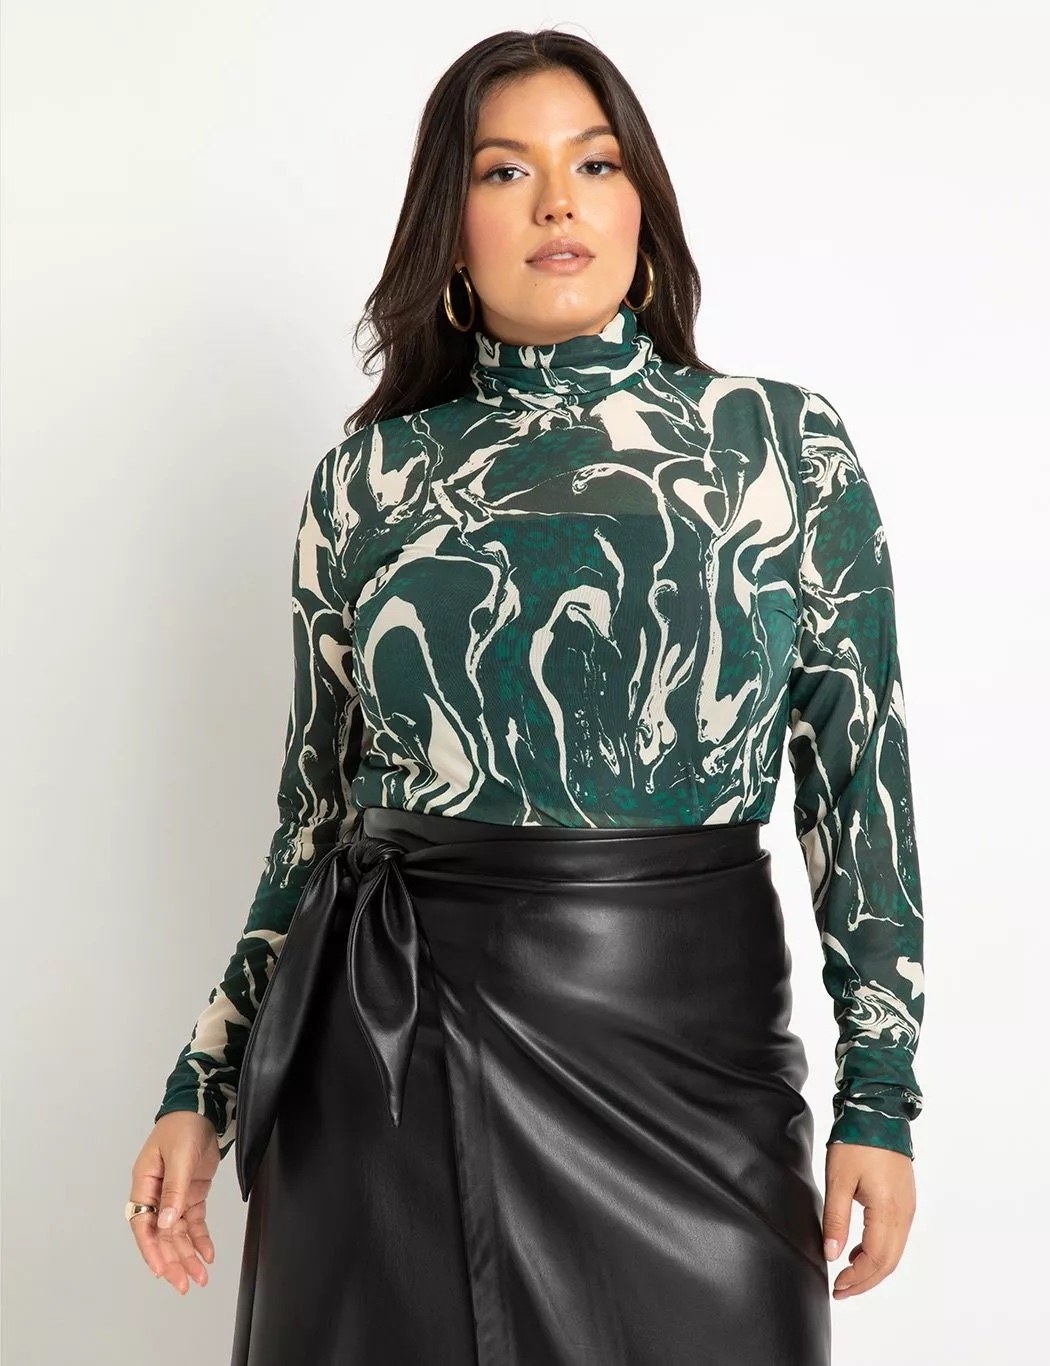 A green and white patterned top with a black leather skirt